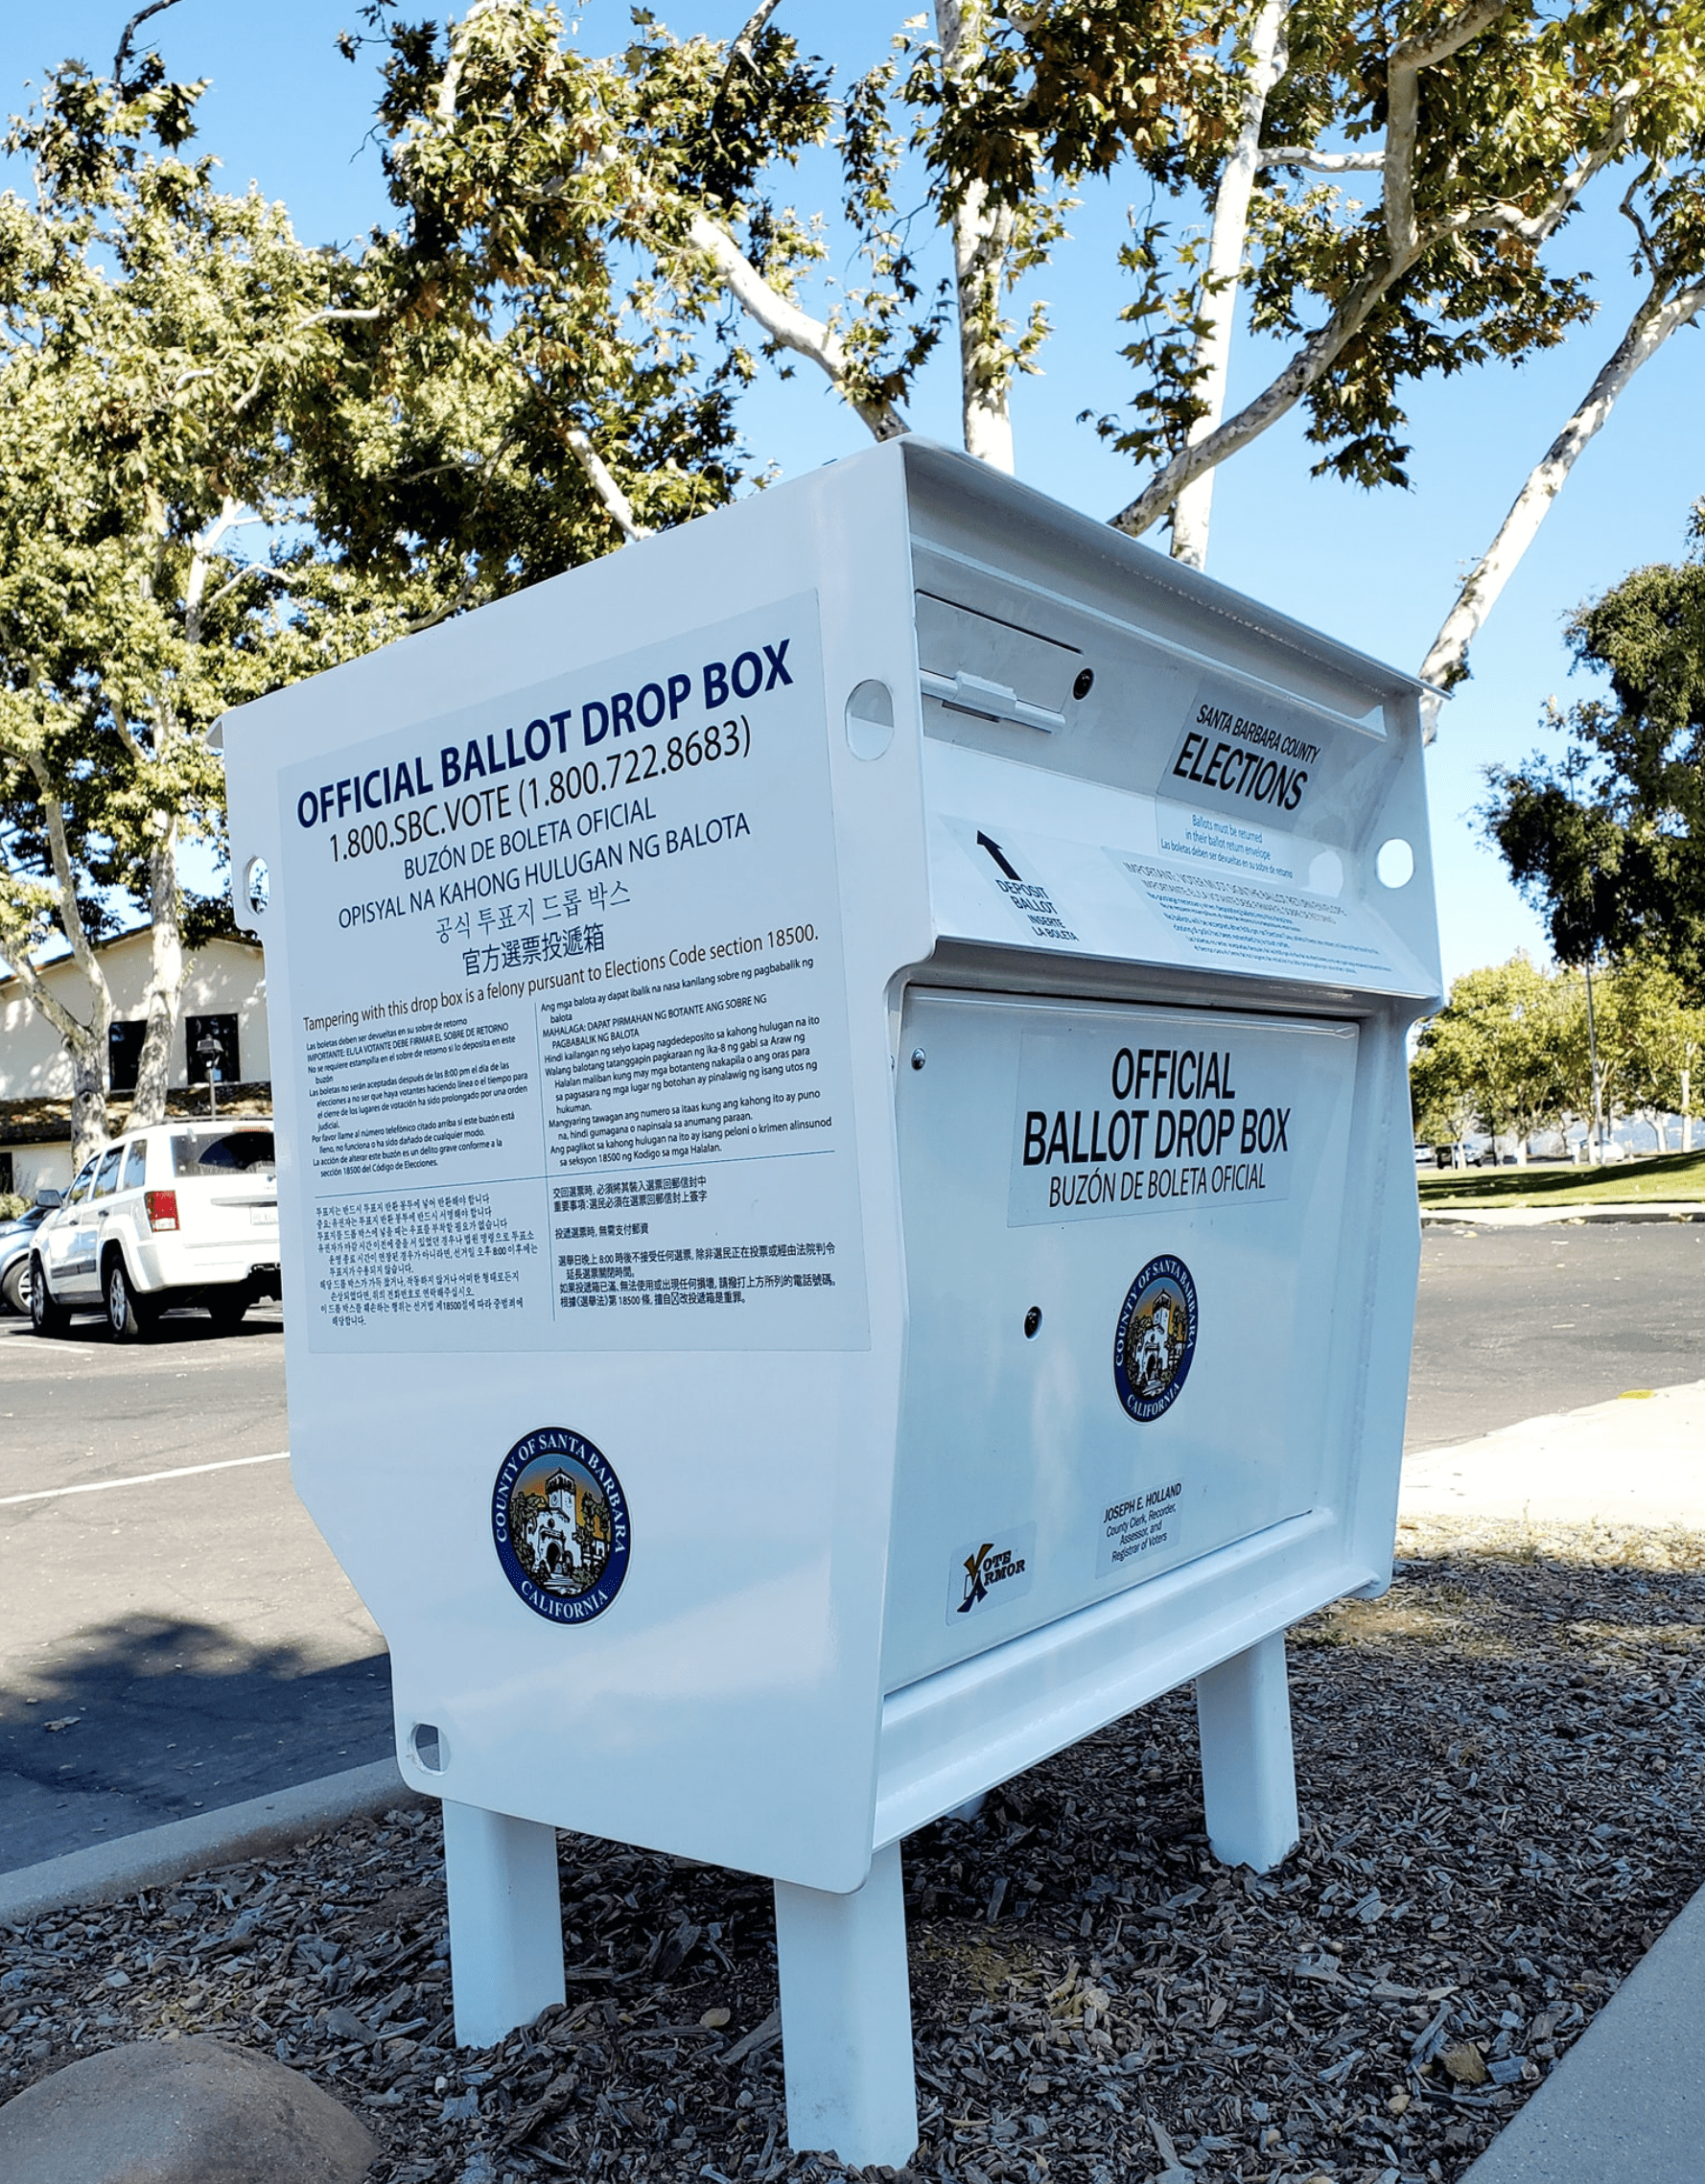 More than 30 countywide secure ballot drop boxes available Oct. 5